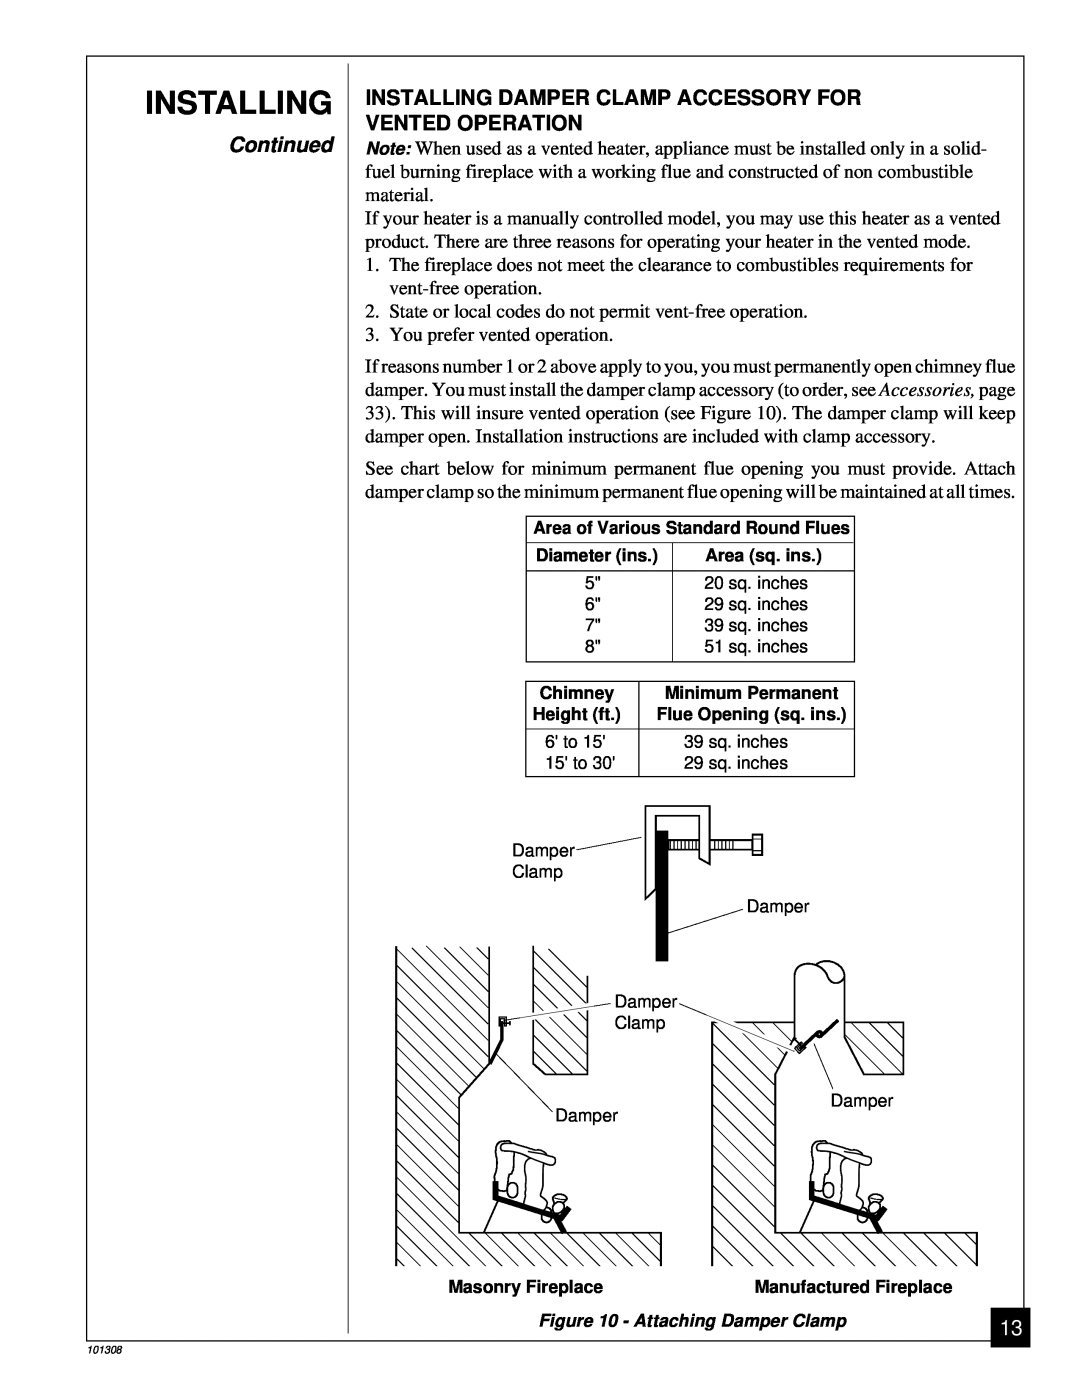 Desa NATURAL GAS LOG HEATER installation manual Installing, Continued, You prefer vented operation 